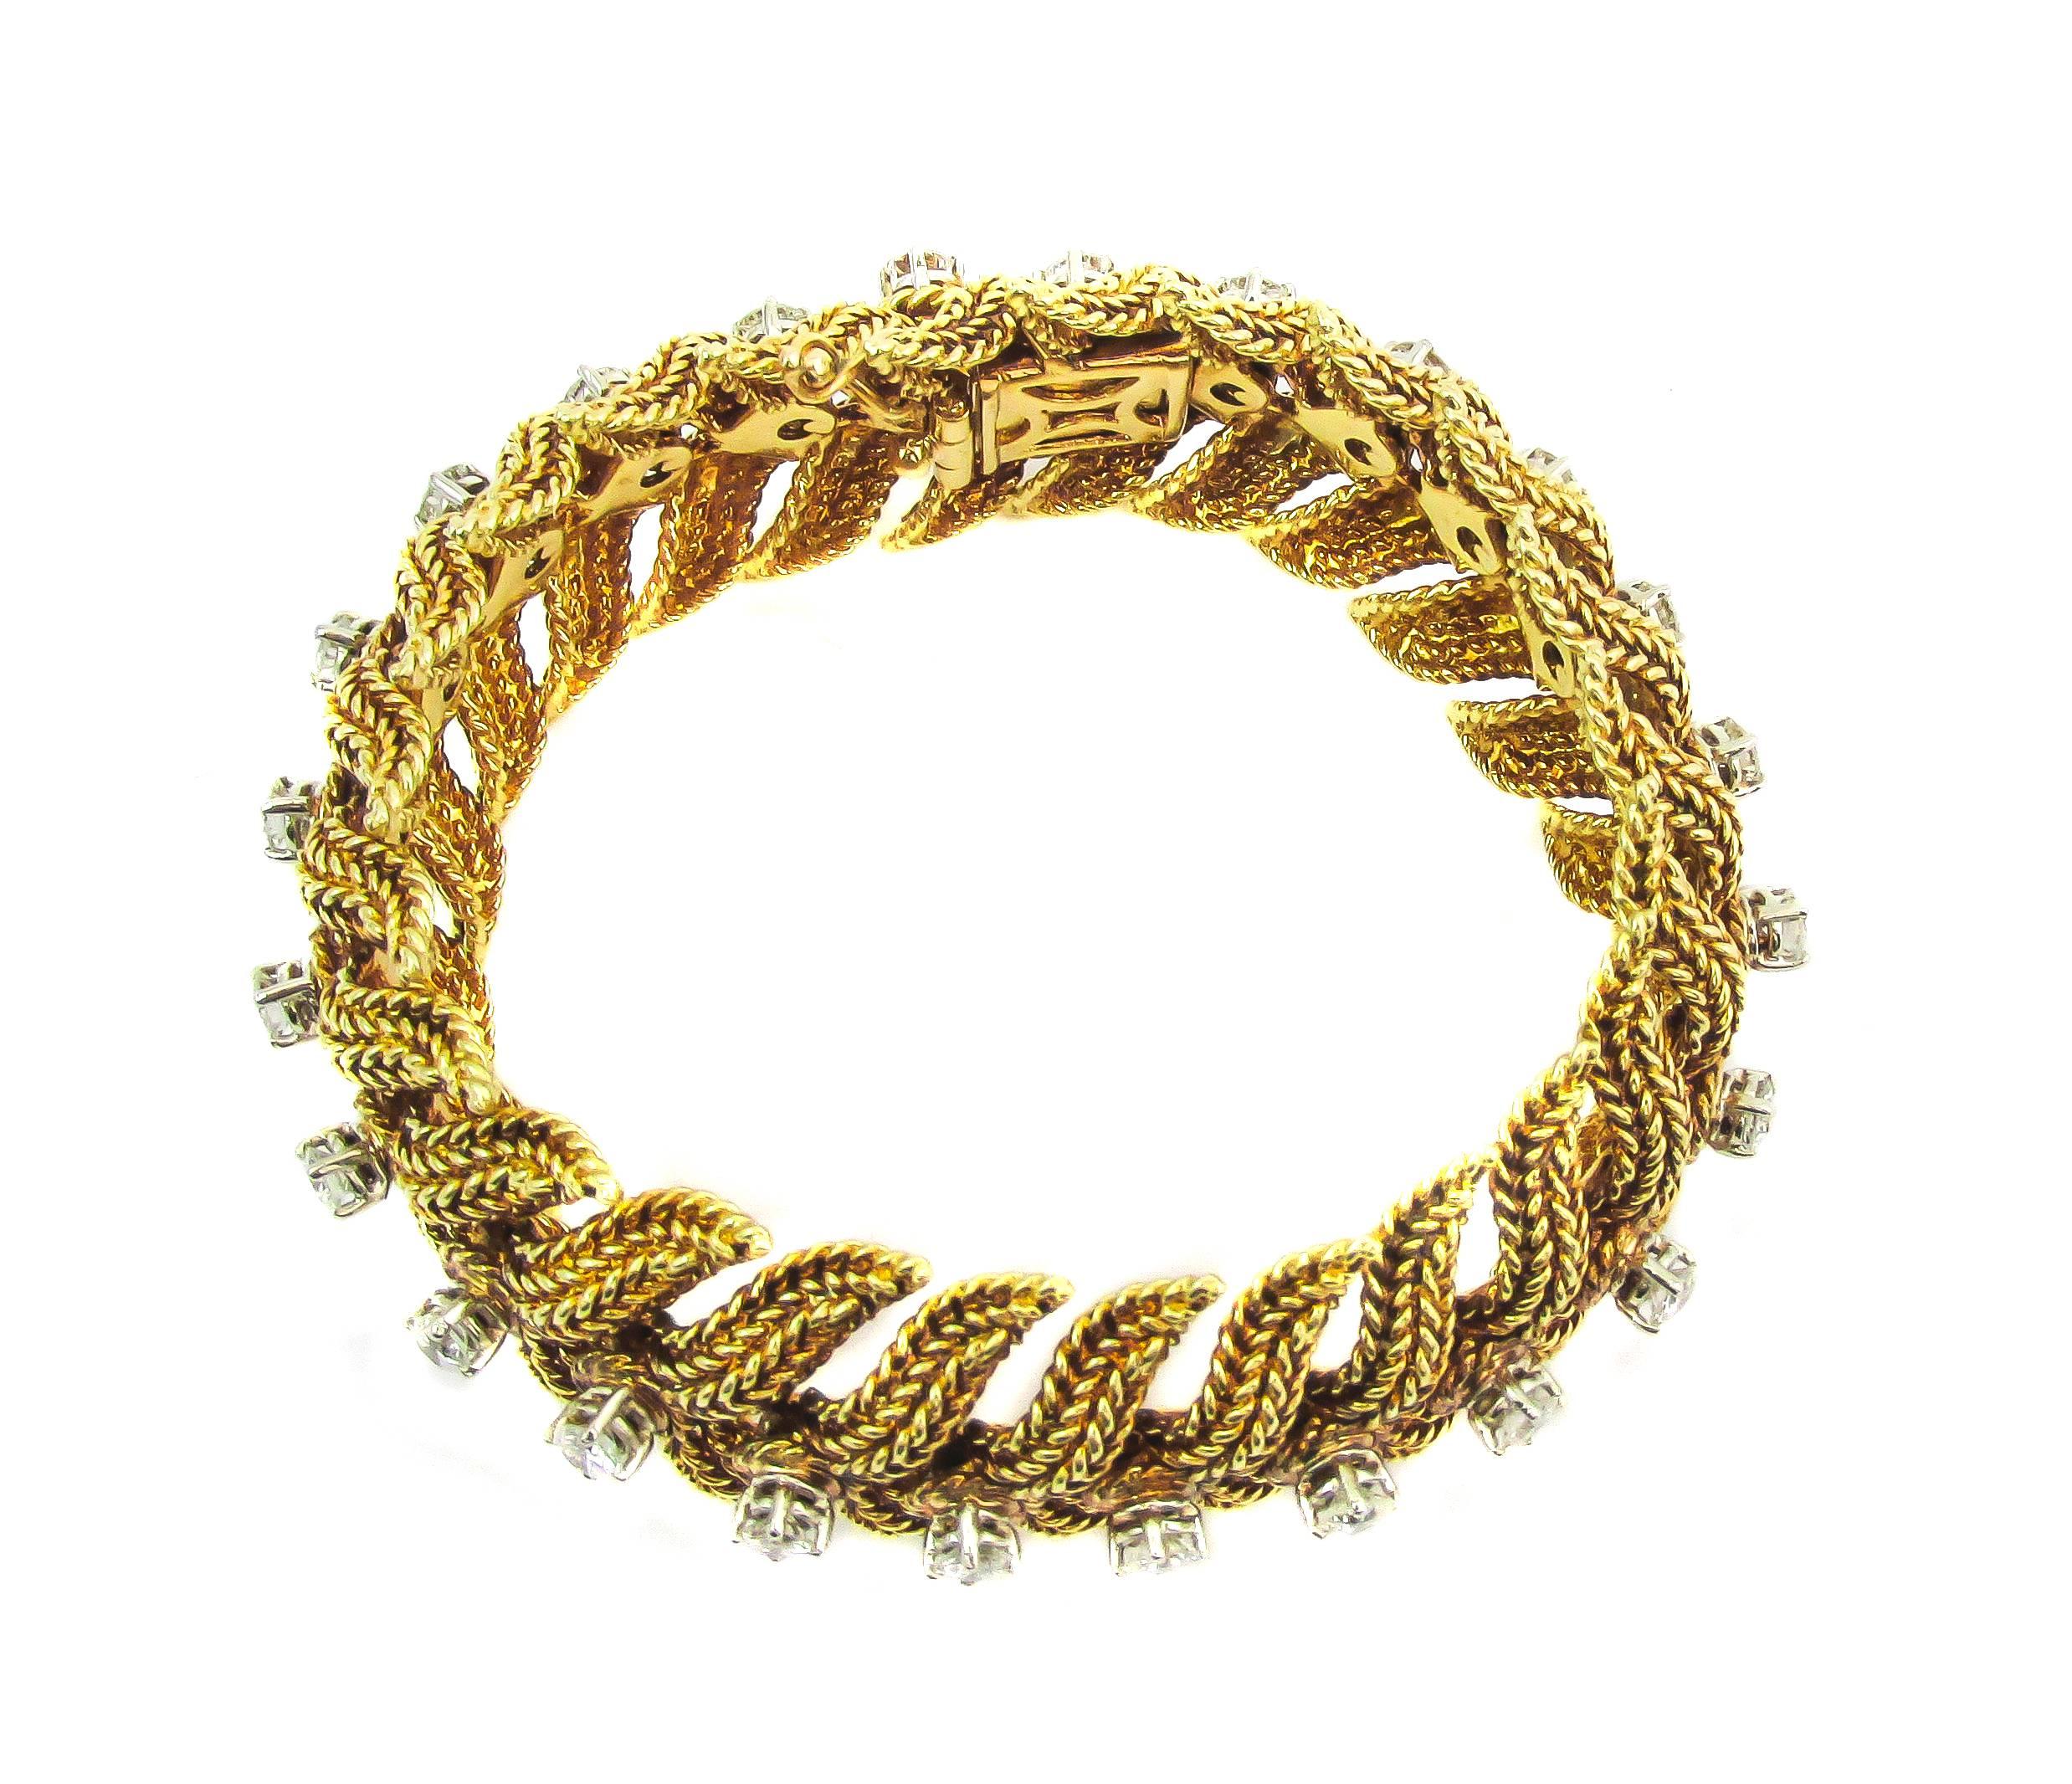 Elegant 1970’s Tiffany & Co. gold and diamond flexible link bracelet constructed out of braided gold wires. The beautifully hand crafted elements, which flow out from the centrally set round brilliant cut diamonds, resemble flowing leaves which move